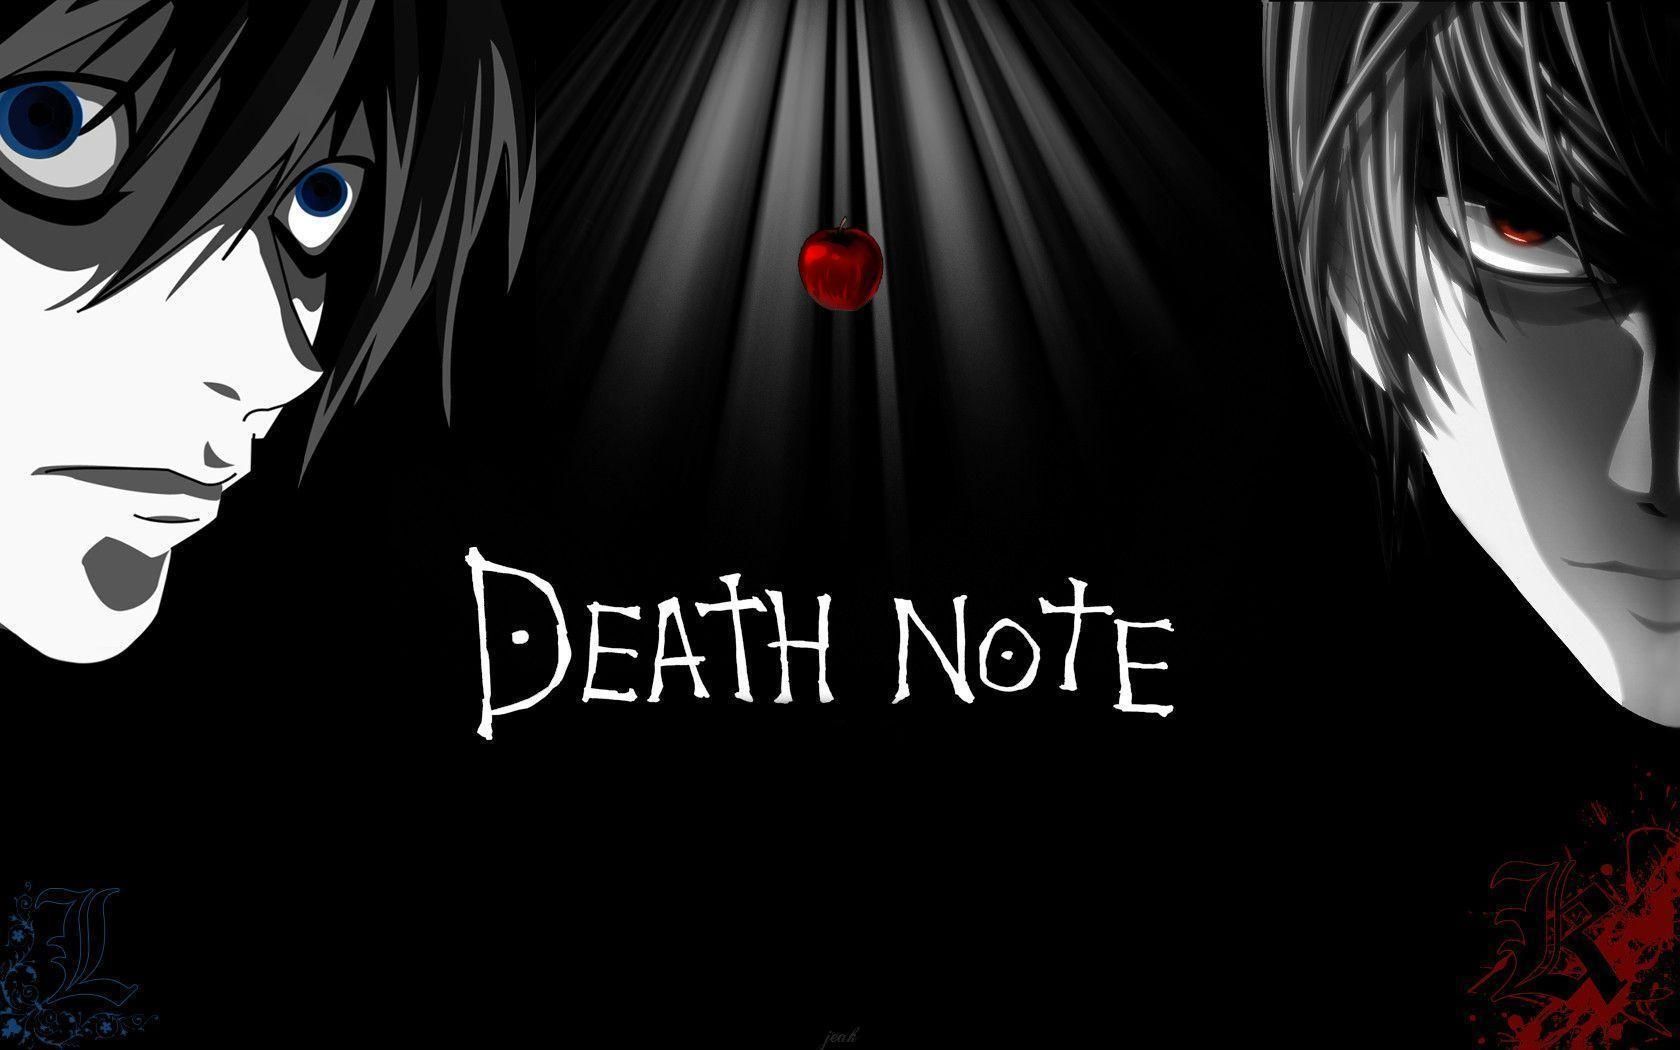 Netflix Announces Death Note LiveAction Series With Duffer Brothers